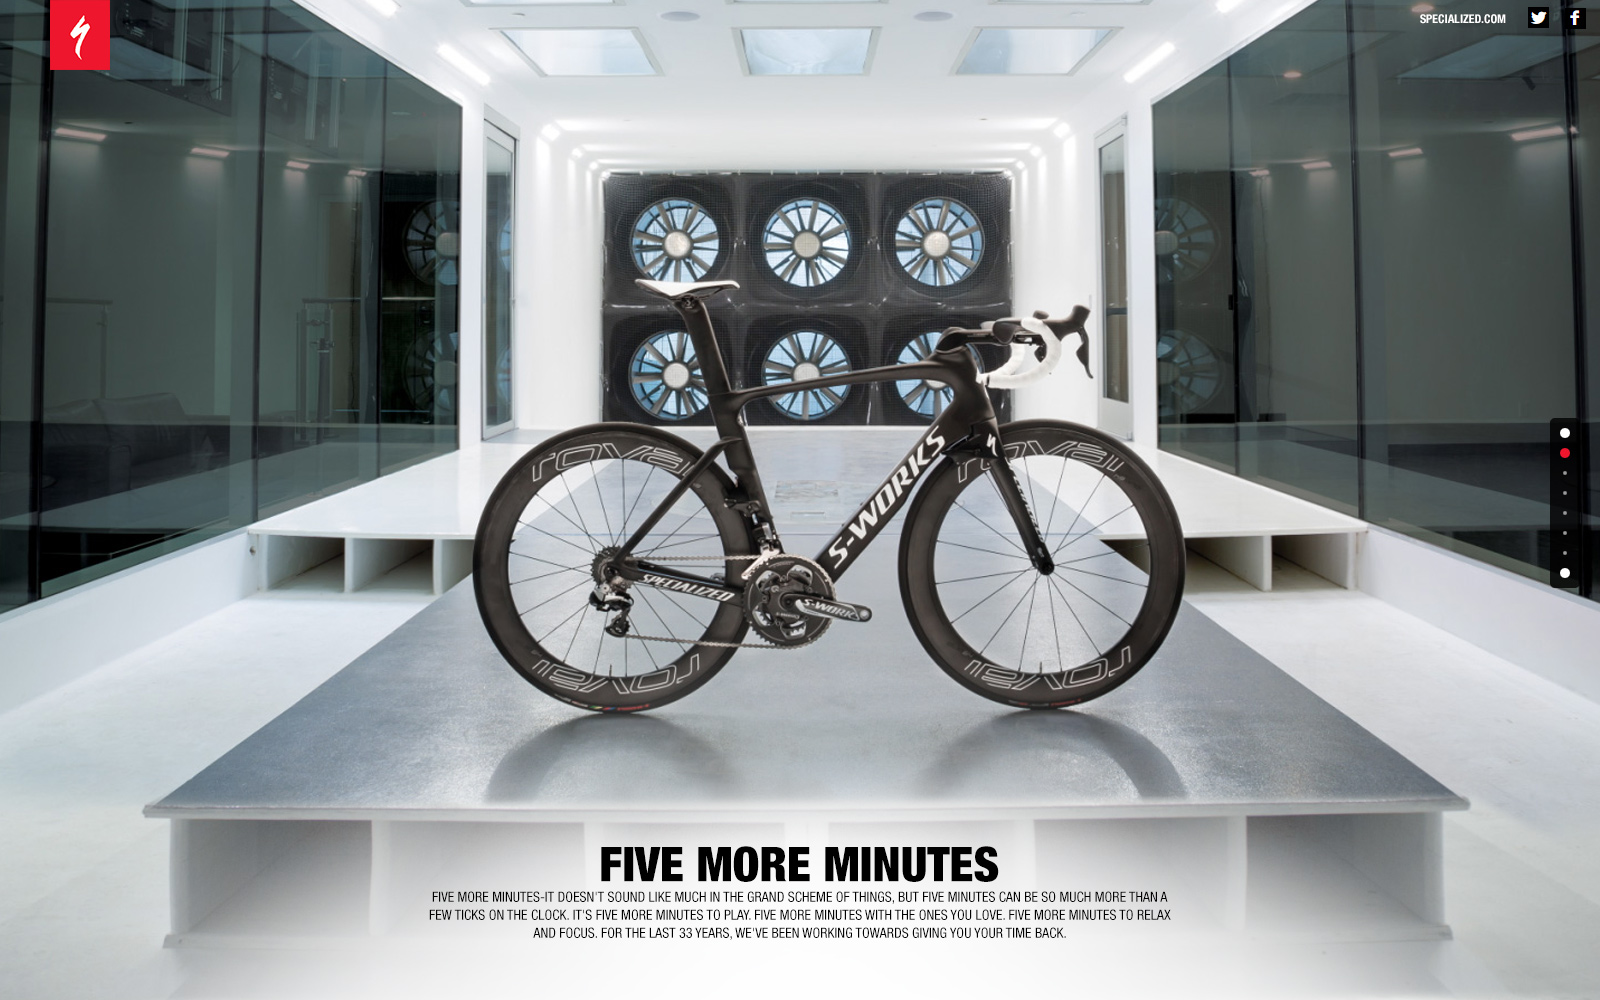 Specialized Bicycles - 5 Minutes